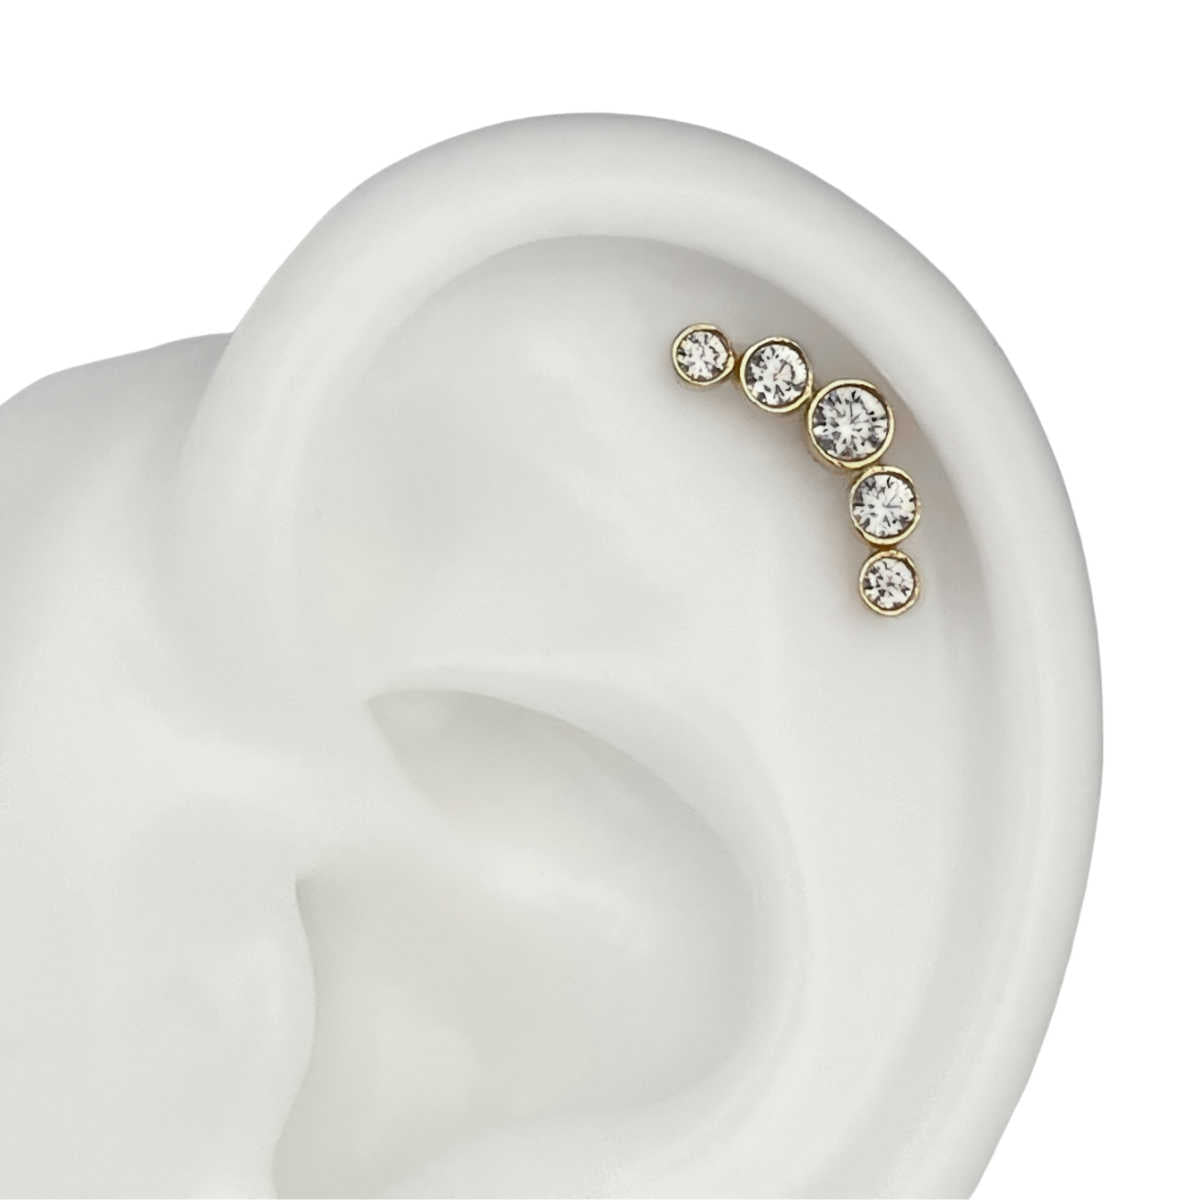 CURVED WHITE OPAL CARTILAGE Flat Back PIERCING EARRING (18G)